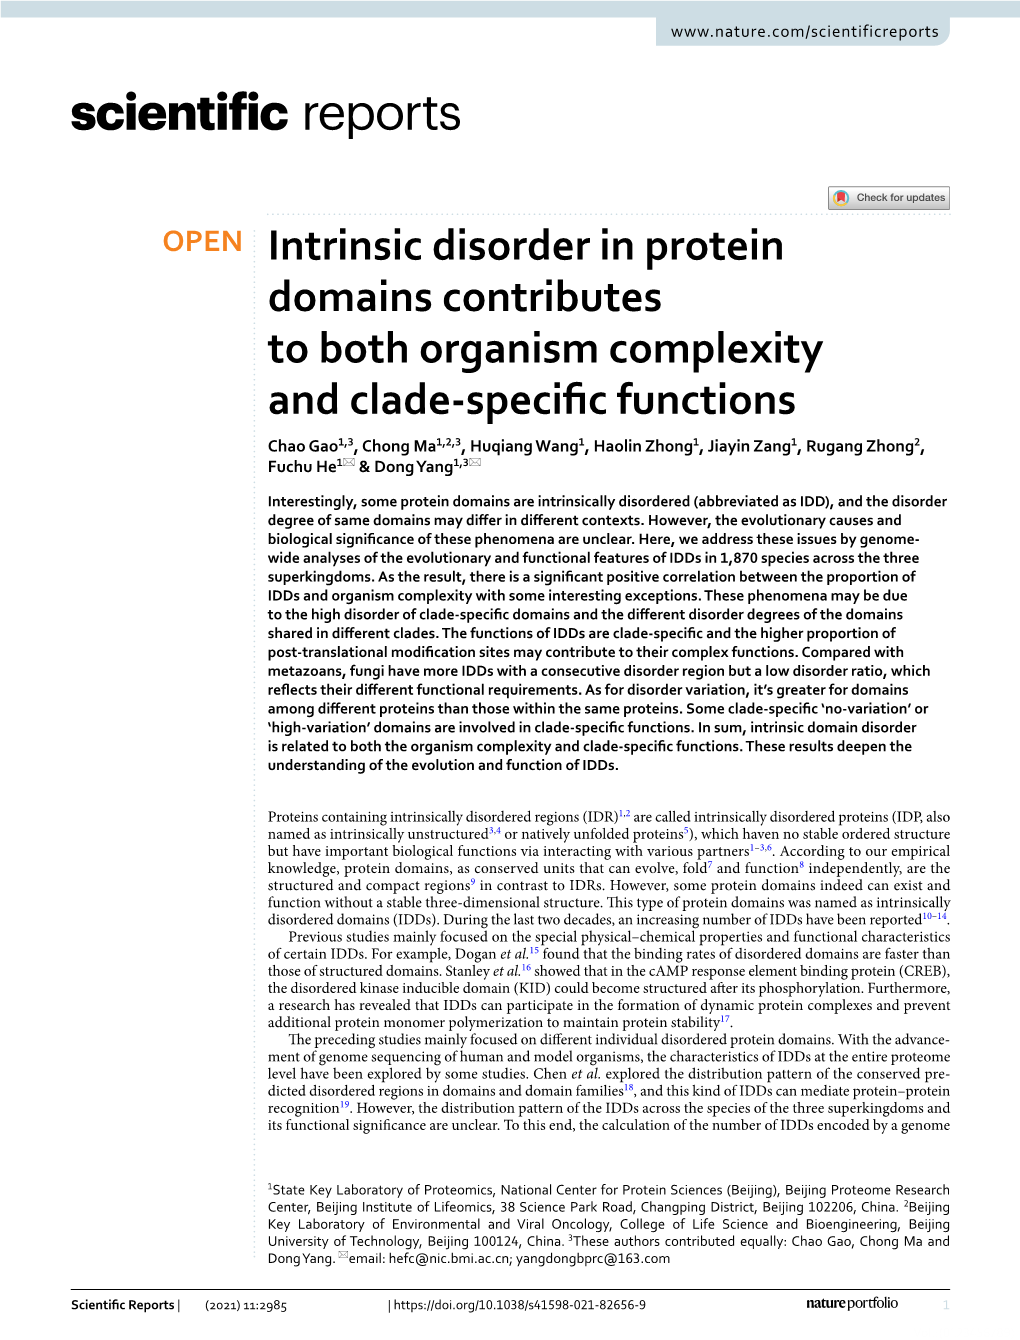 Intrinsic Disorder in Protein Domains Contributes to Both Organism